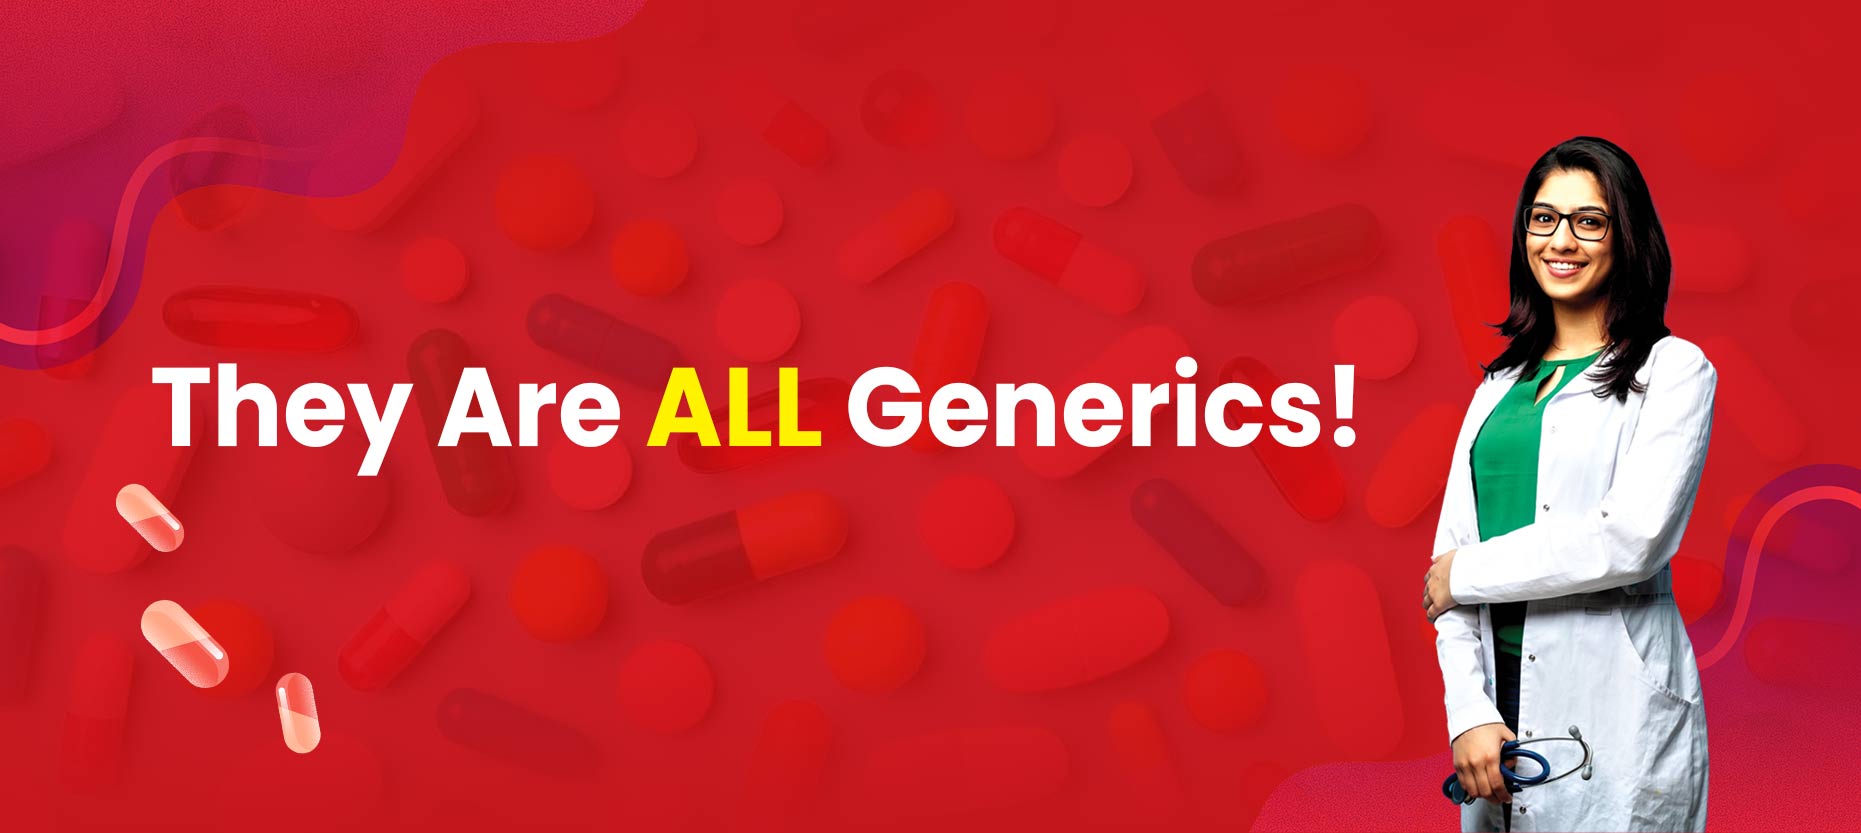 Almost All Medicines We Take Are Generic!